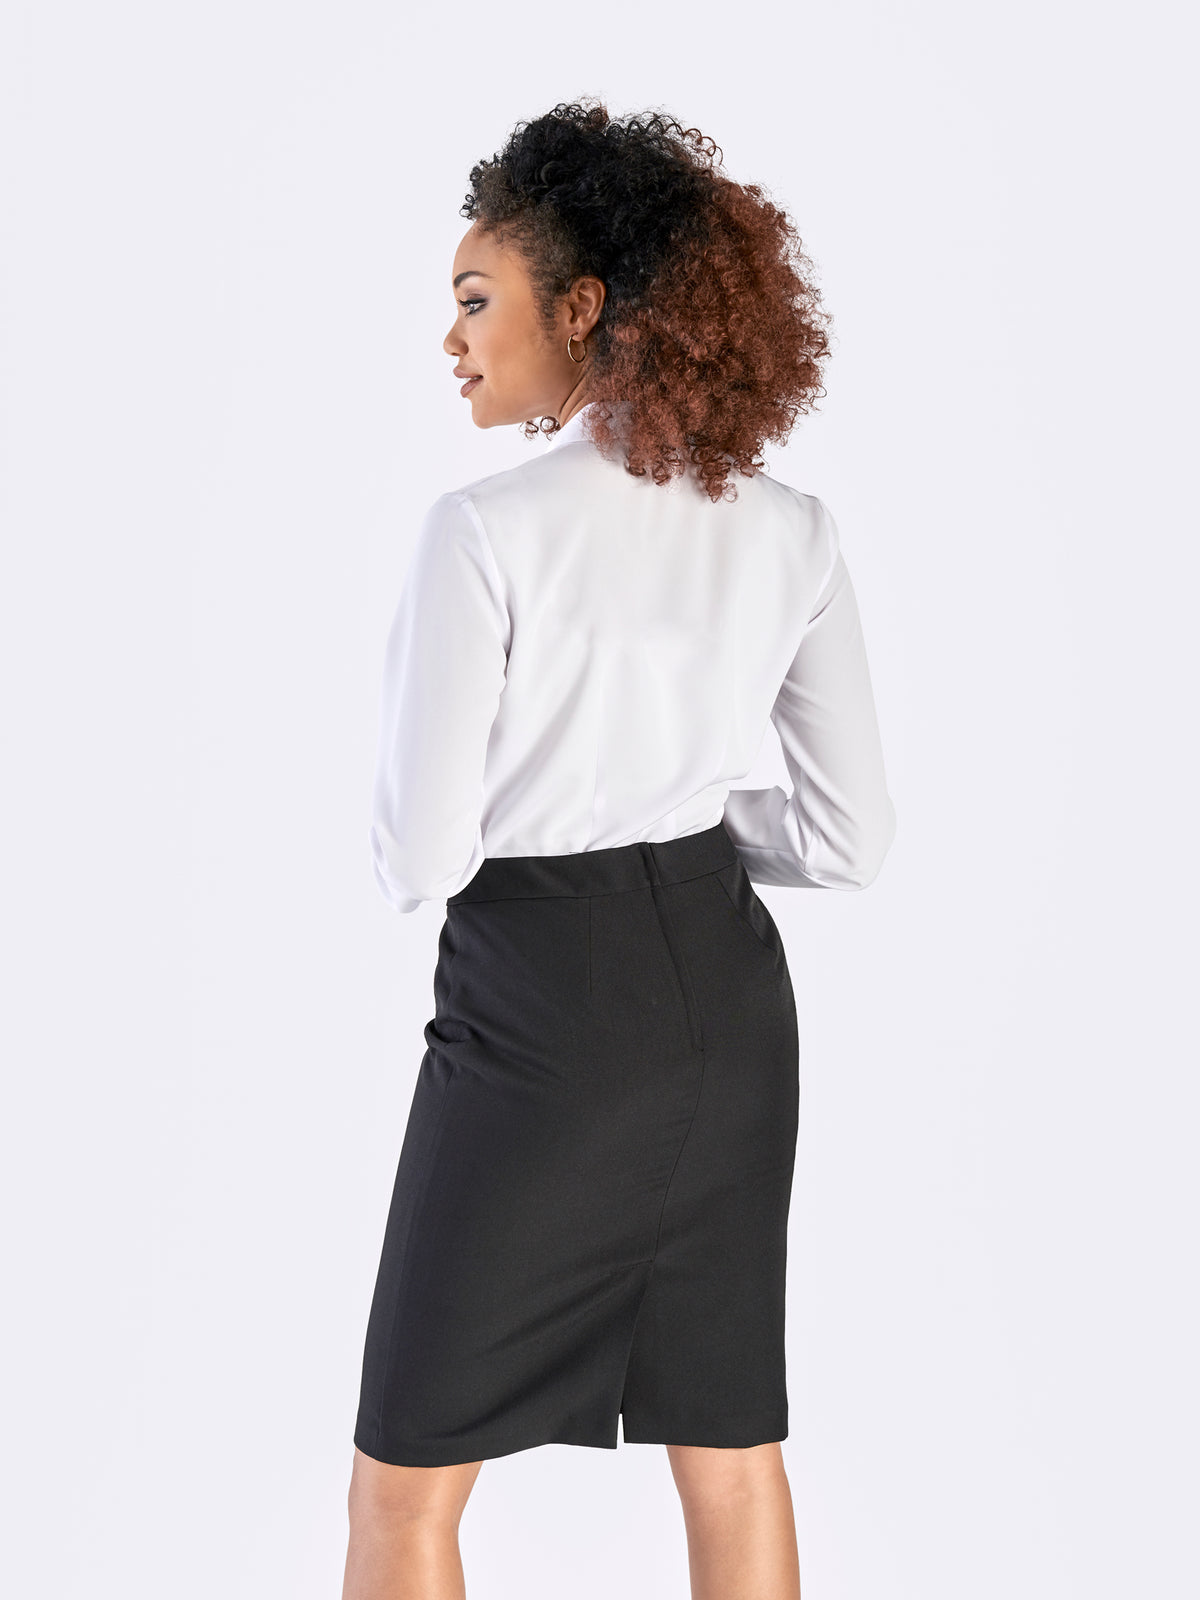 Cathy classic buttoned shirt - white